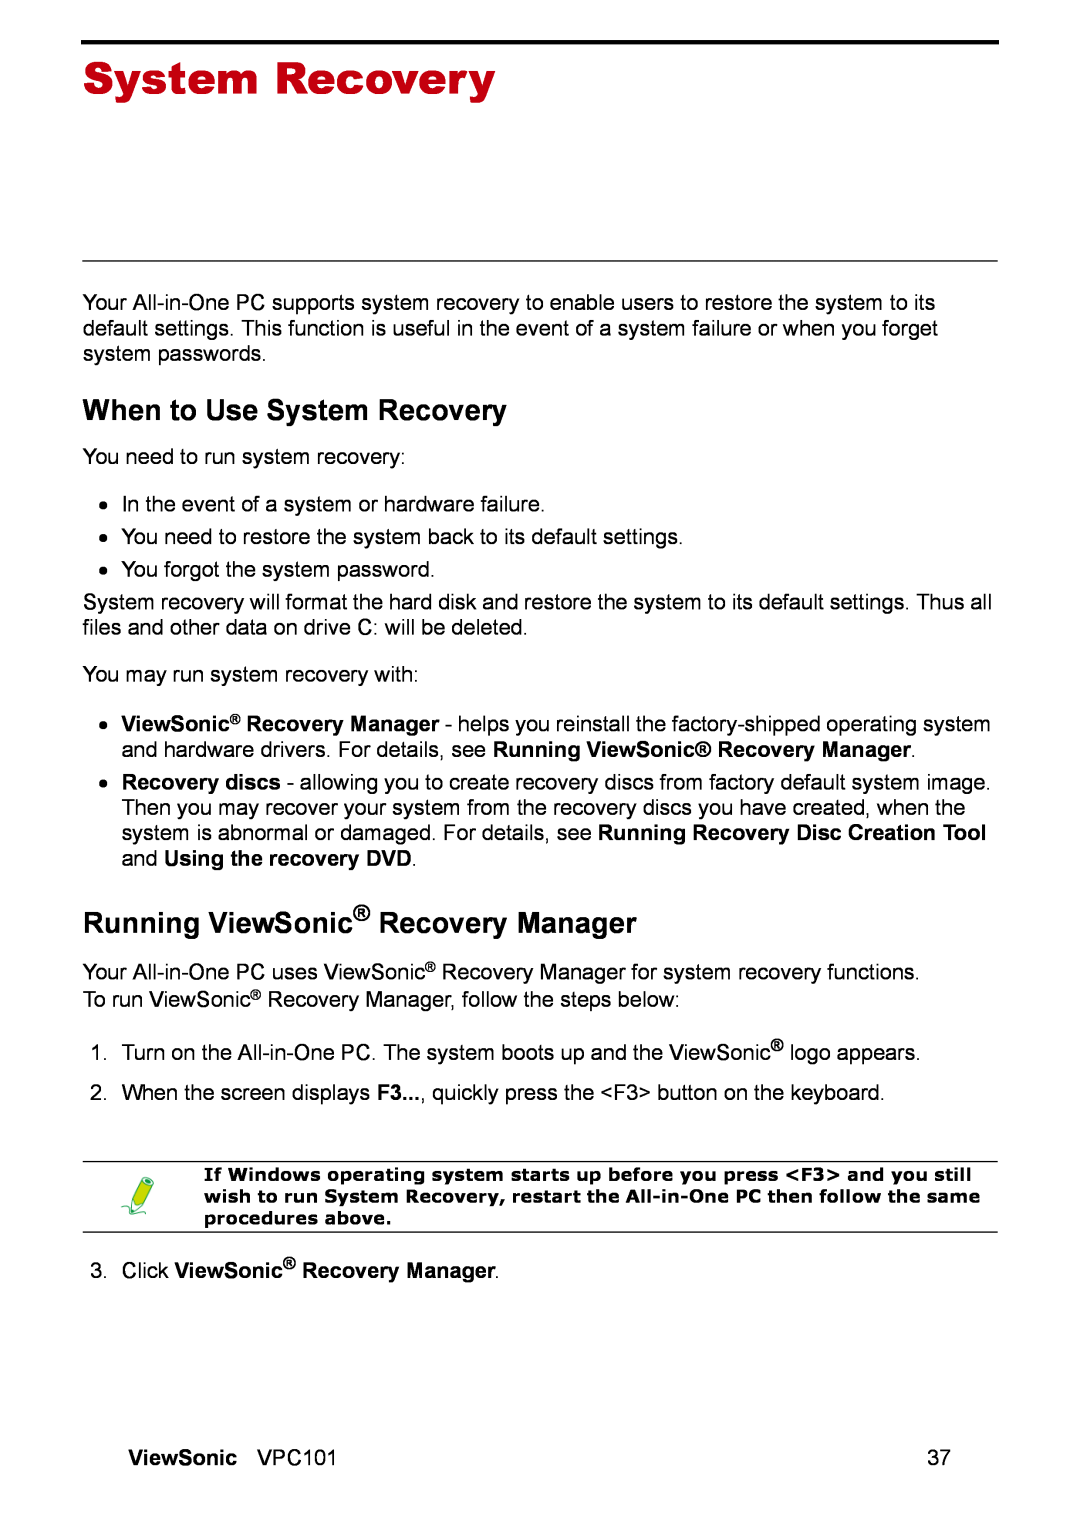 ViewSonic VPC101 manual When to Use System Recovery, Running ViewSonic Recovery Manager 